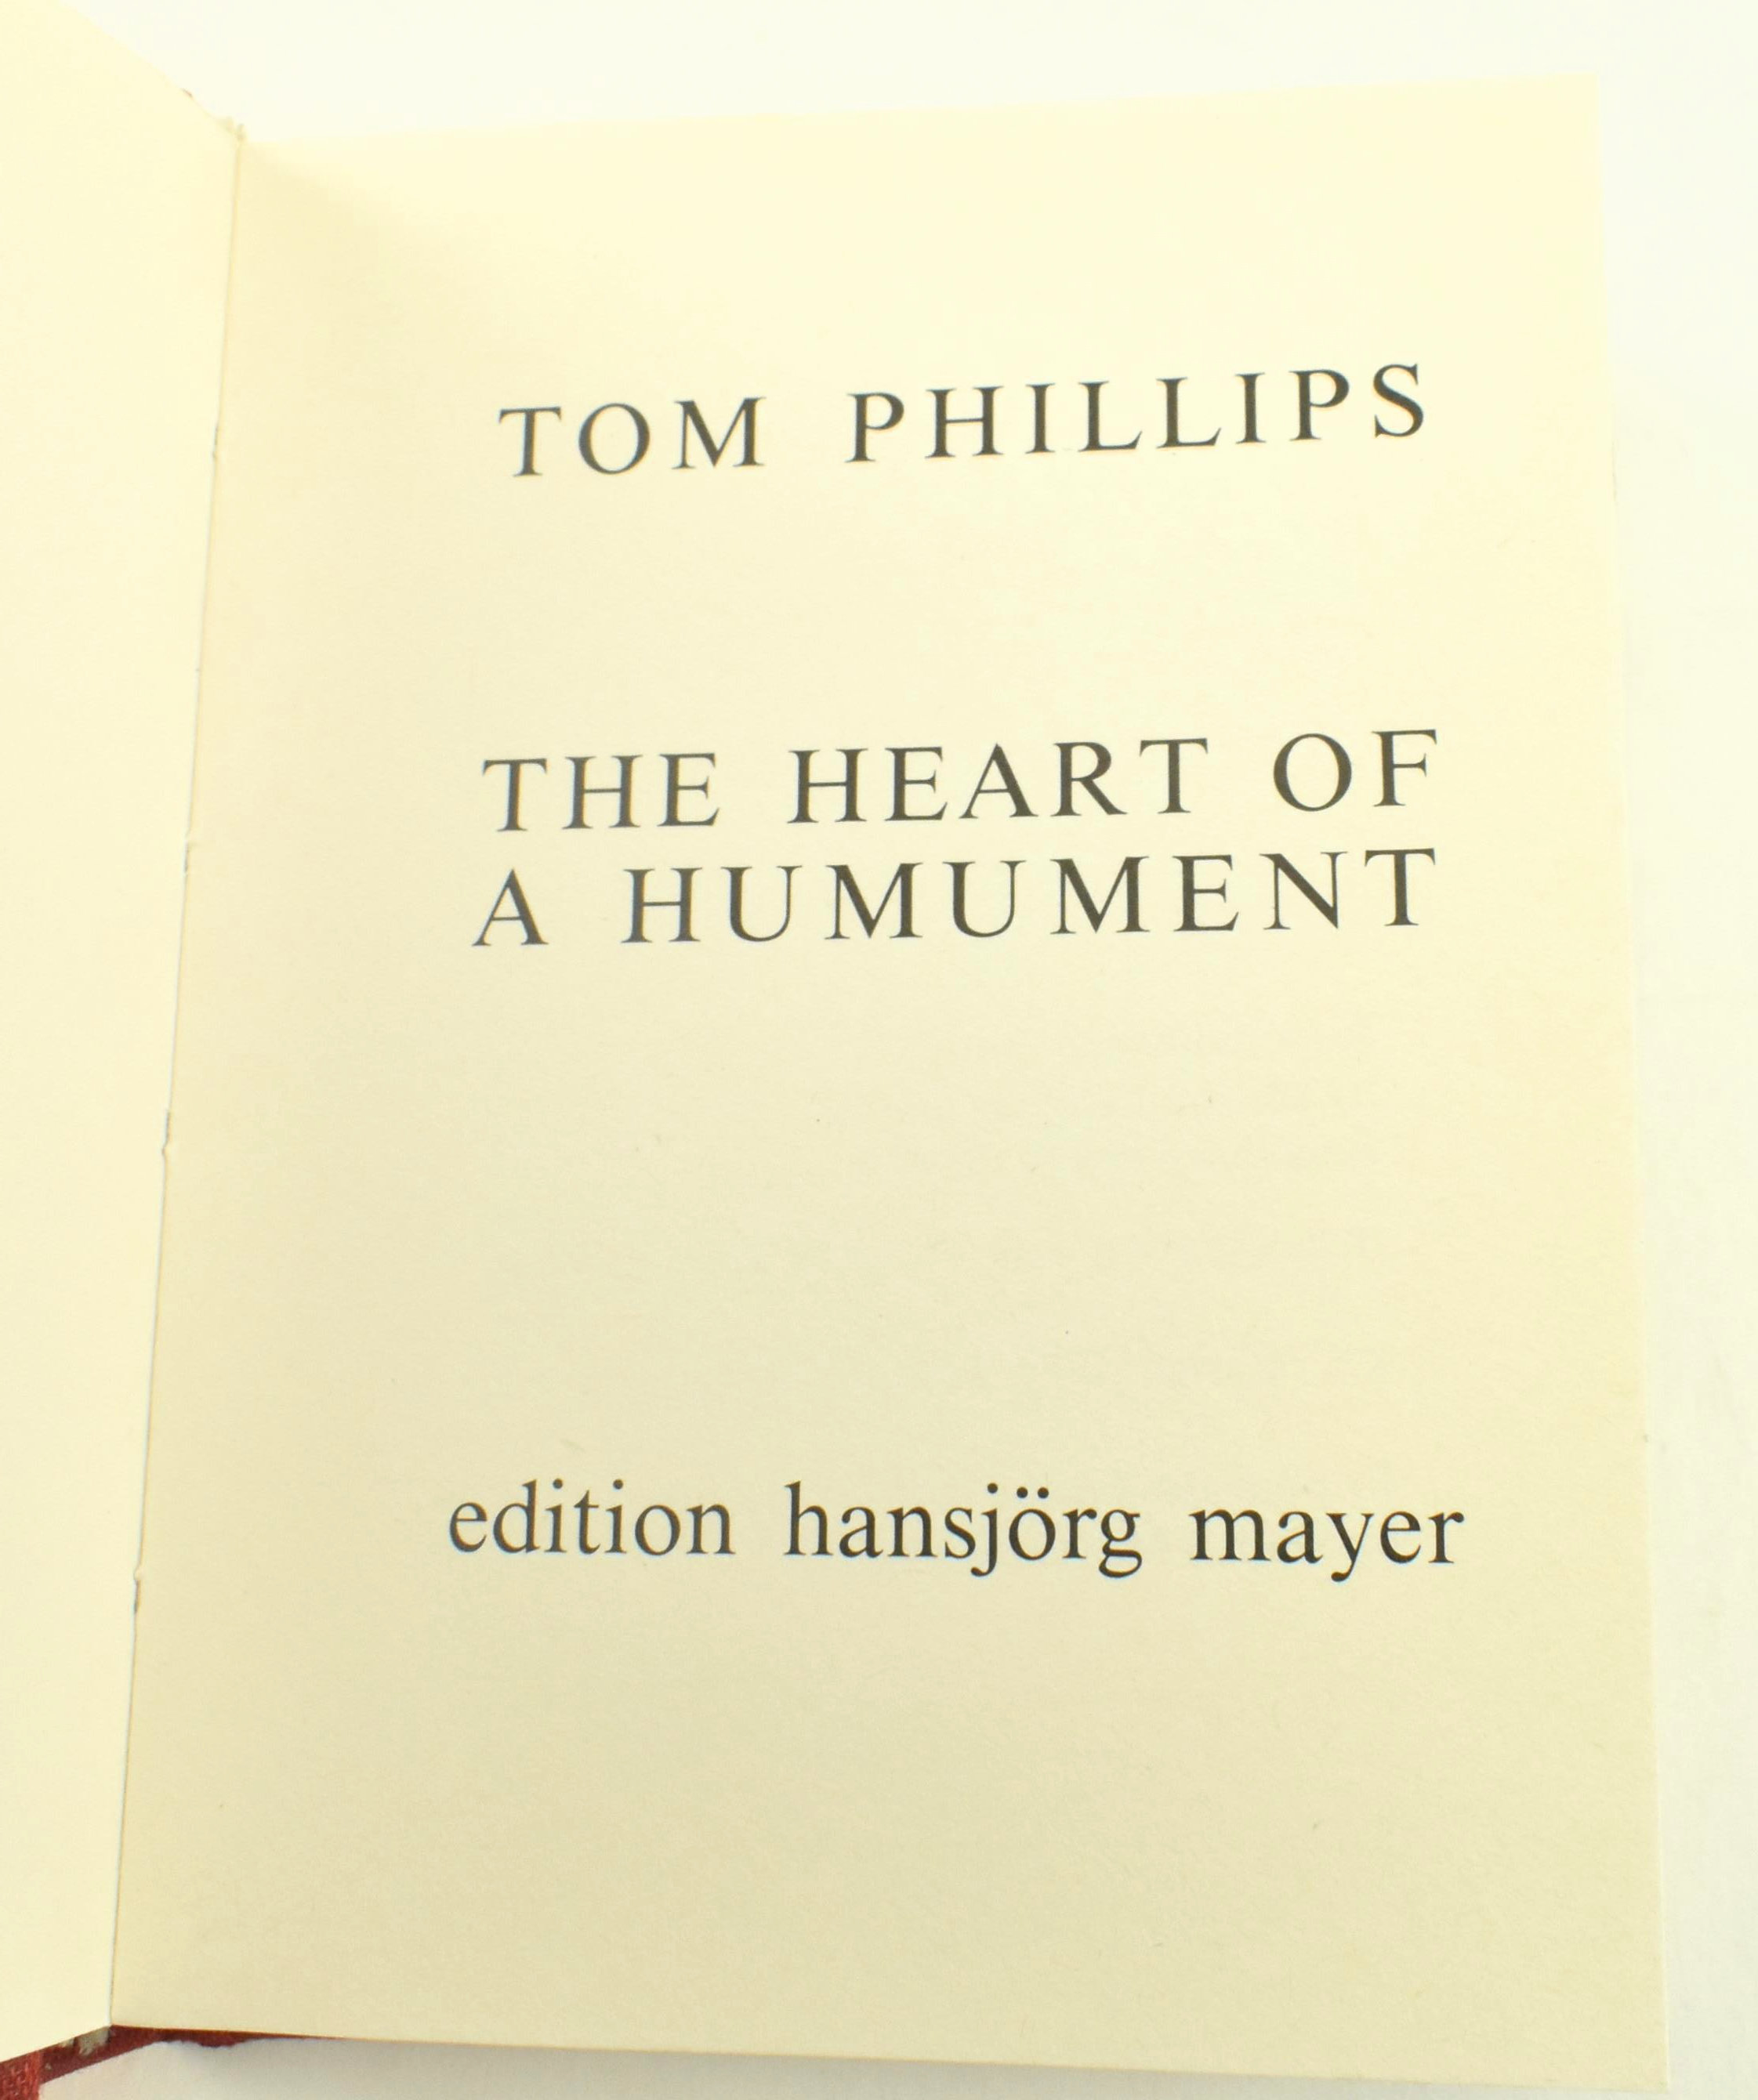 TOM PHILLIPS. TWO ILLUSTRATED WORKS, INCL. ONE SIGNED - Image 5 of 11